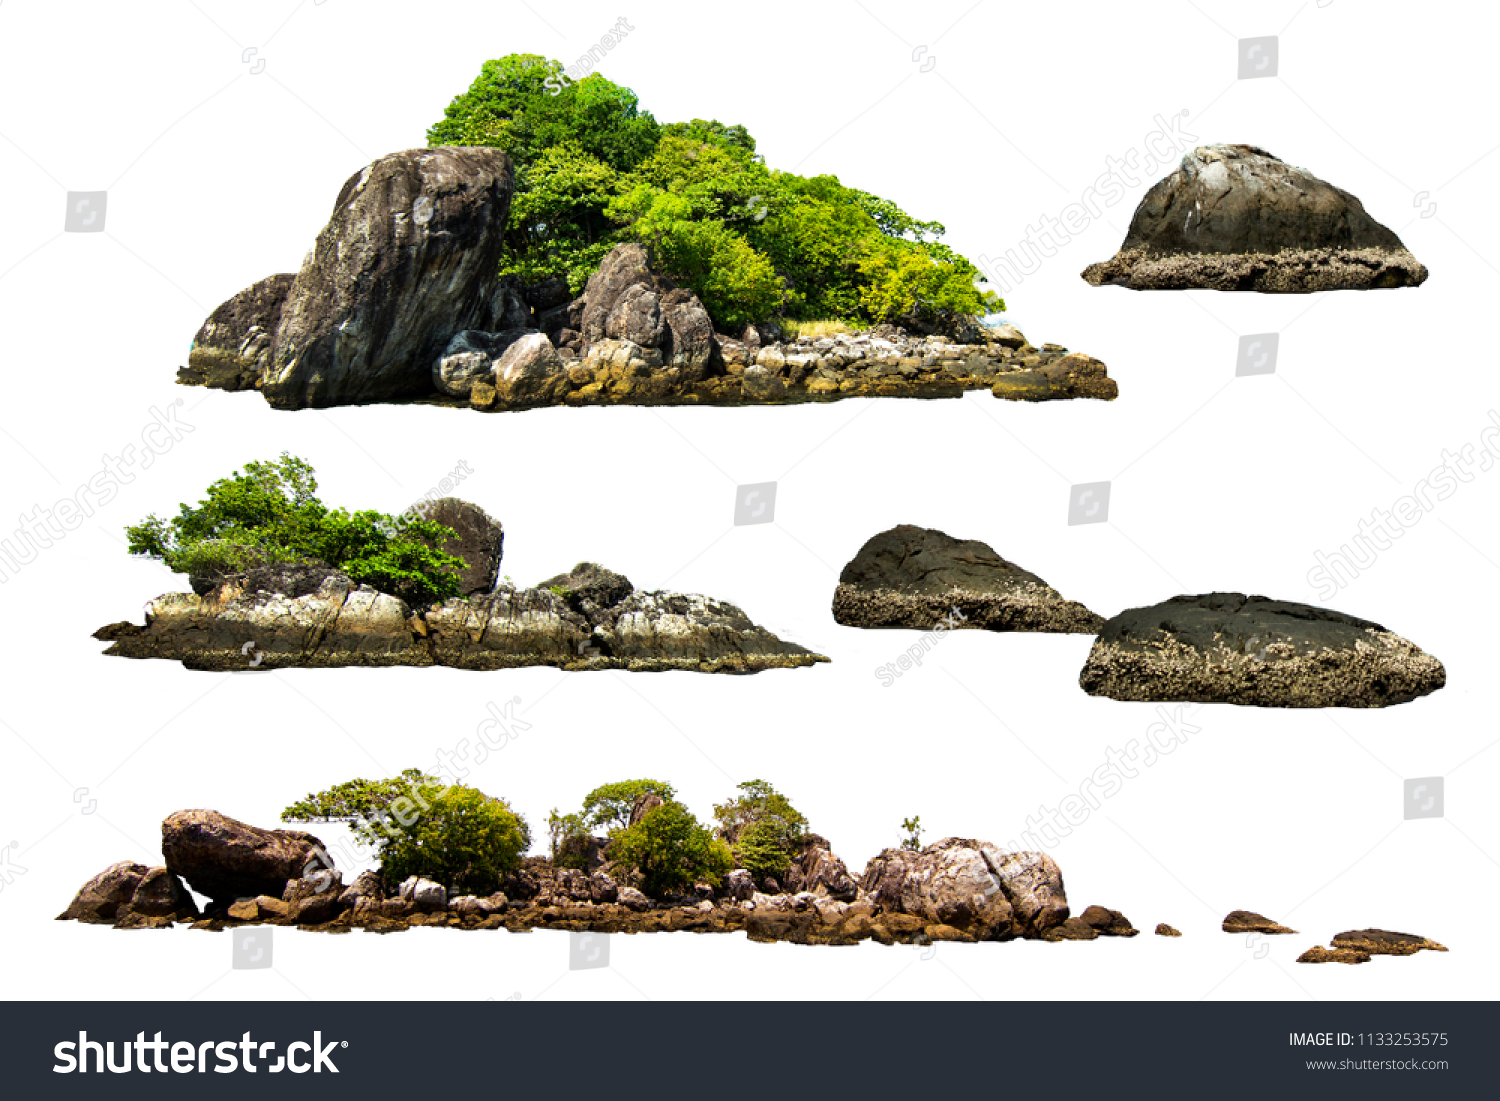 The trees. Mountain on the island and rocks.Isolated on White background #1133253575